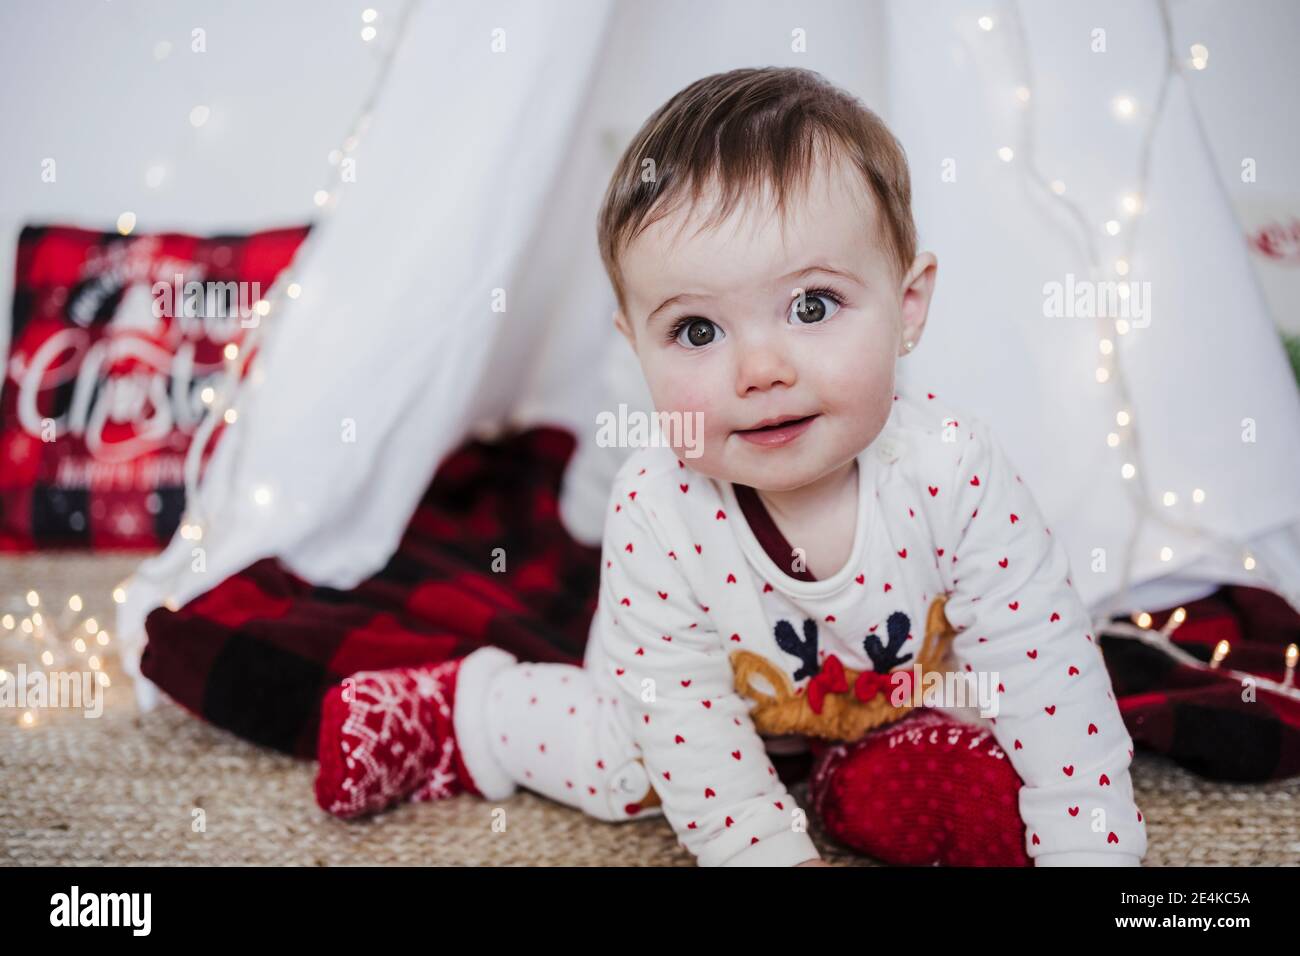 Cute baby girl smiling while sitting against tent during Christmas at home Stock Photo